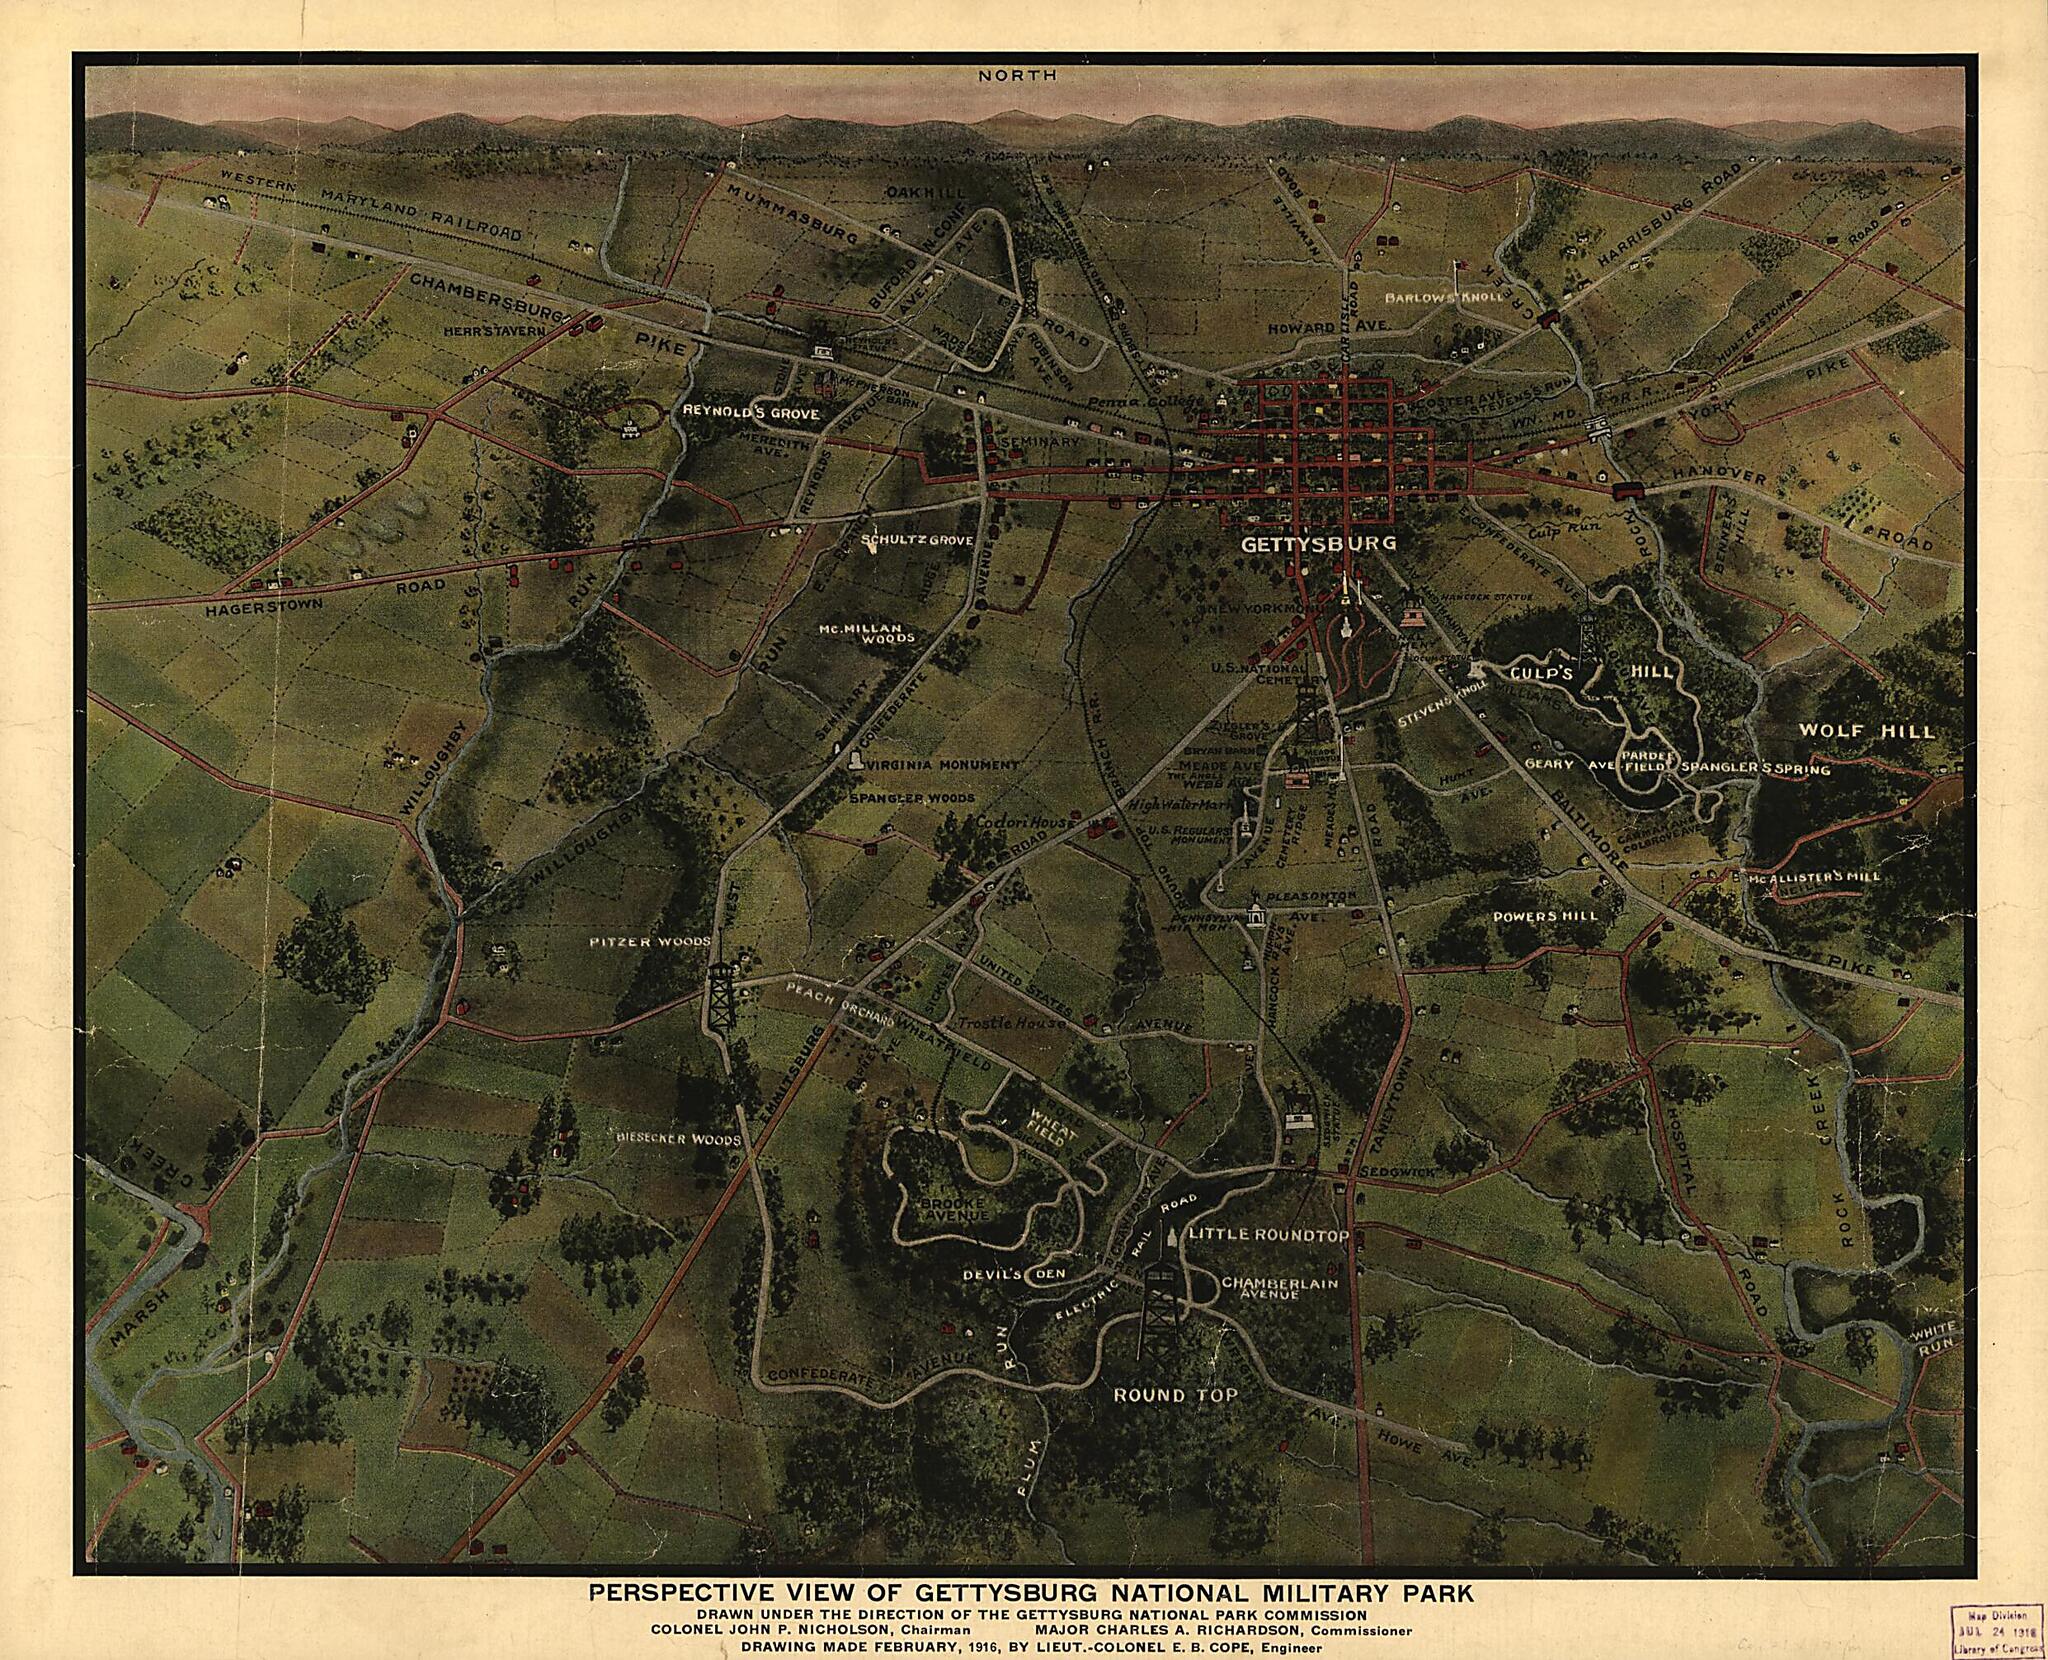 This old map of Perspective View of Gettysburg National Military Park from 1916 was created by Emmor B. Cope in 1916